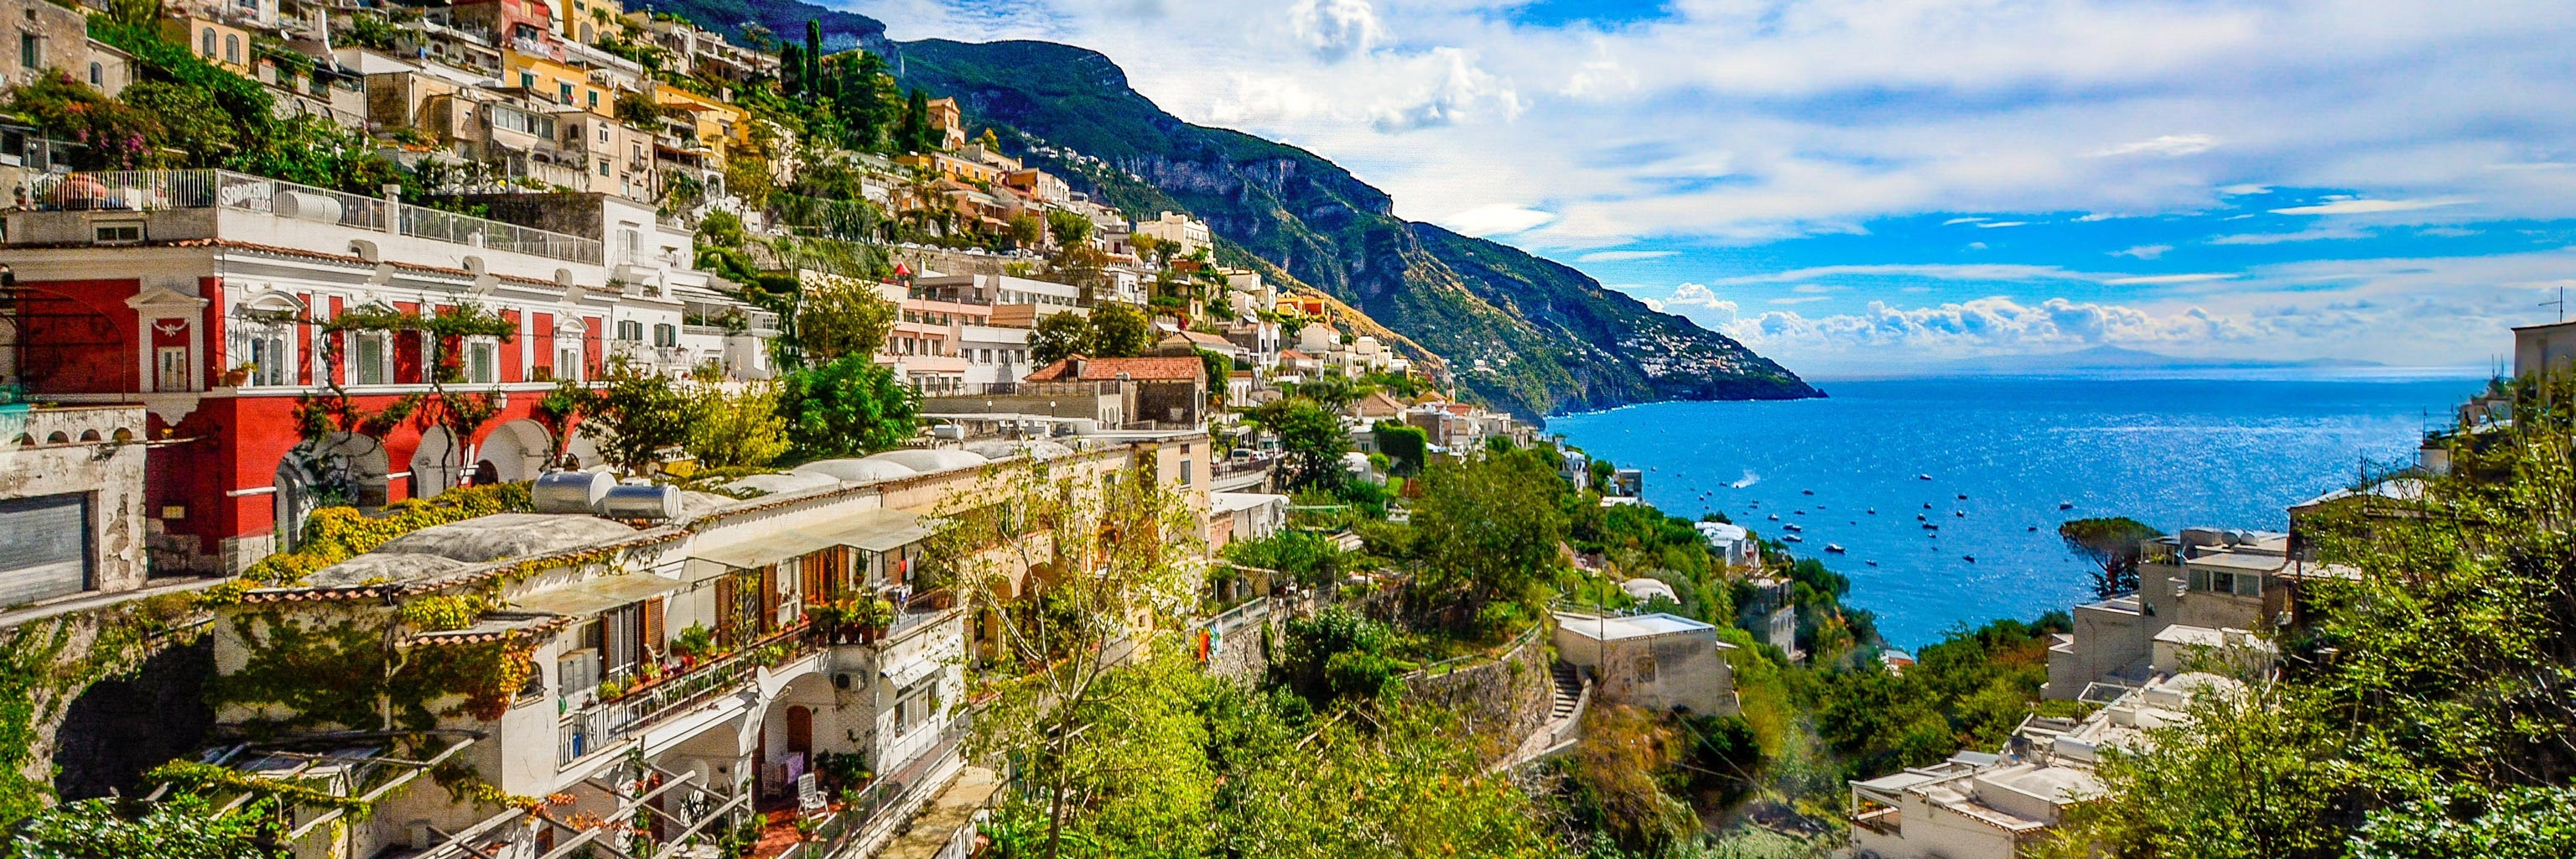 Colorful hillside overlooking the water in Salerno, Italy. 